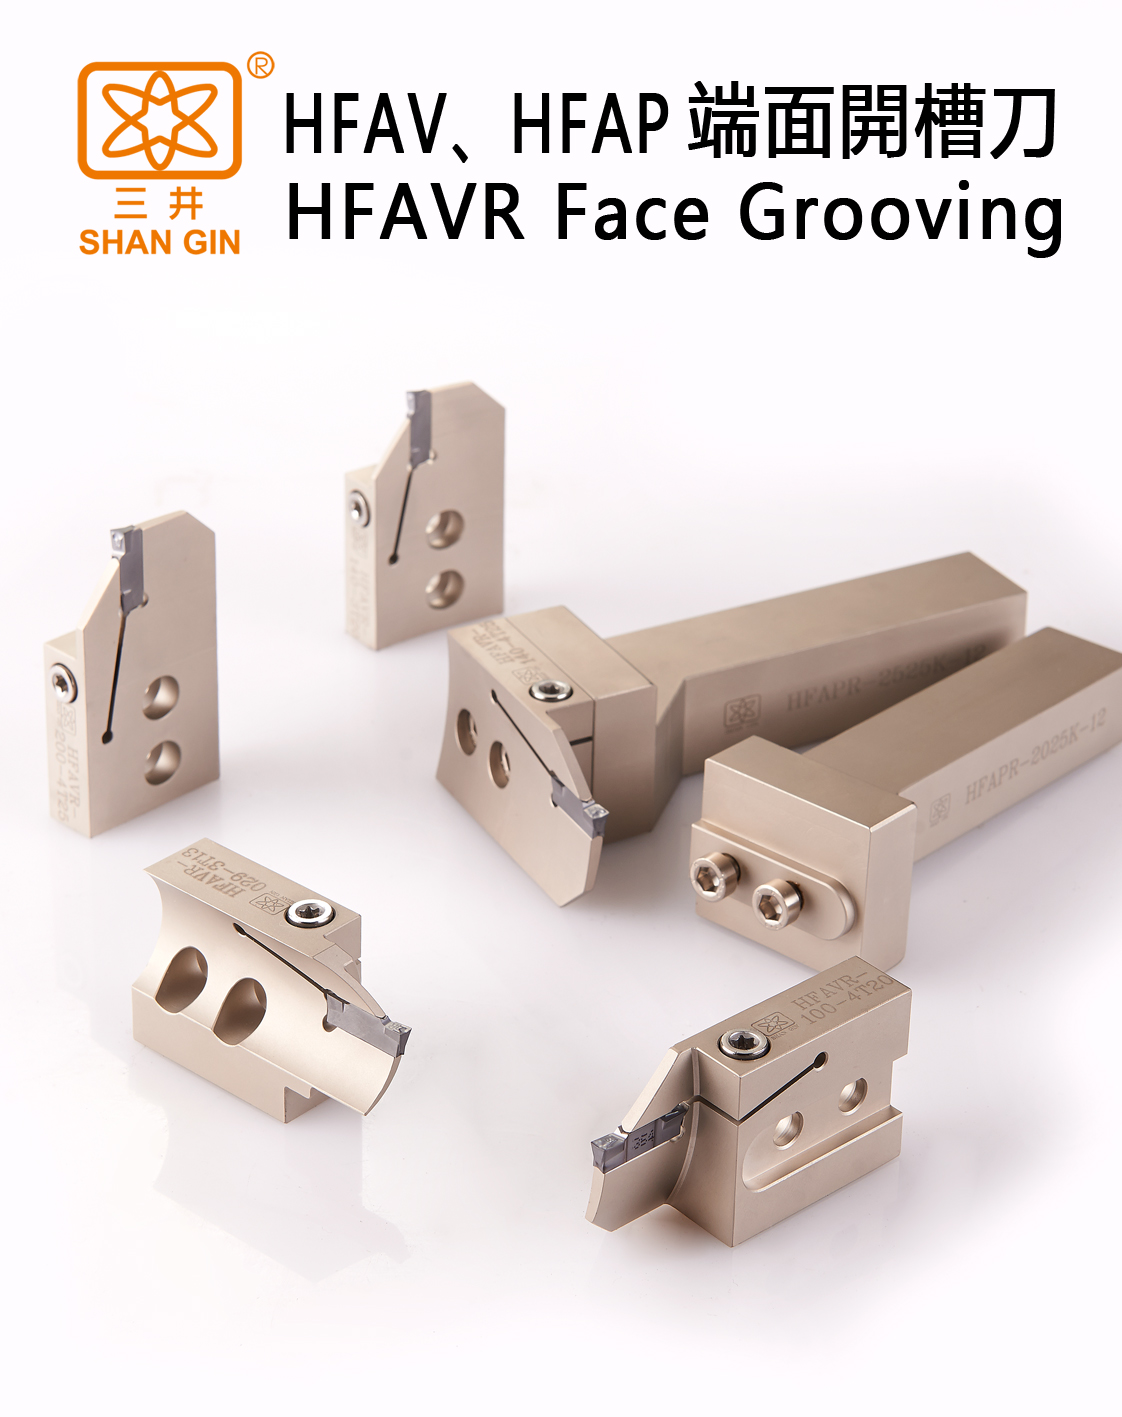 Products|HFAV、HFAP FACE GROOVING